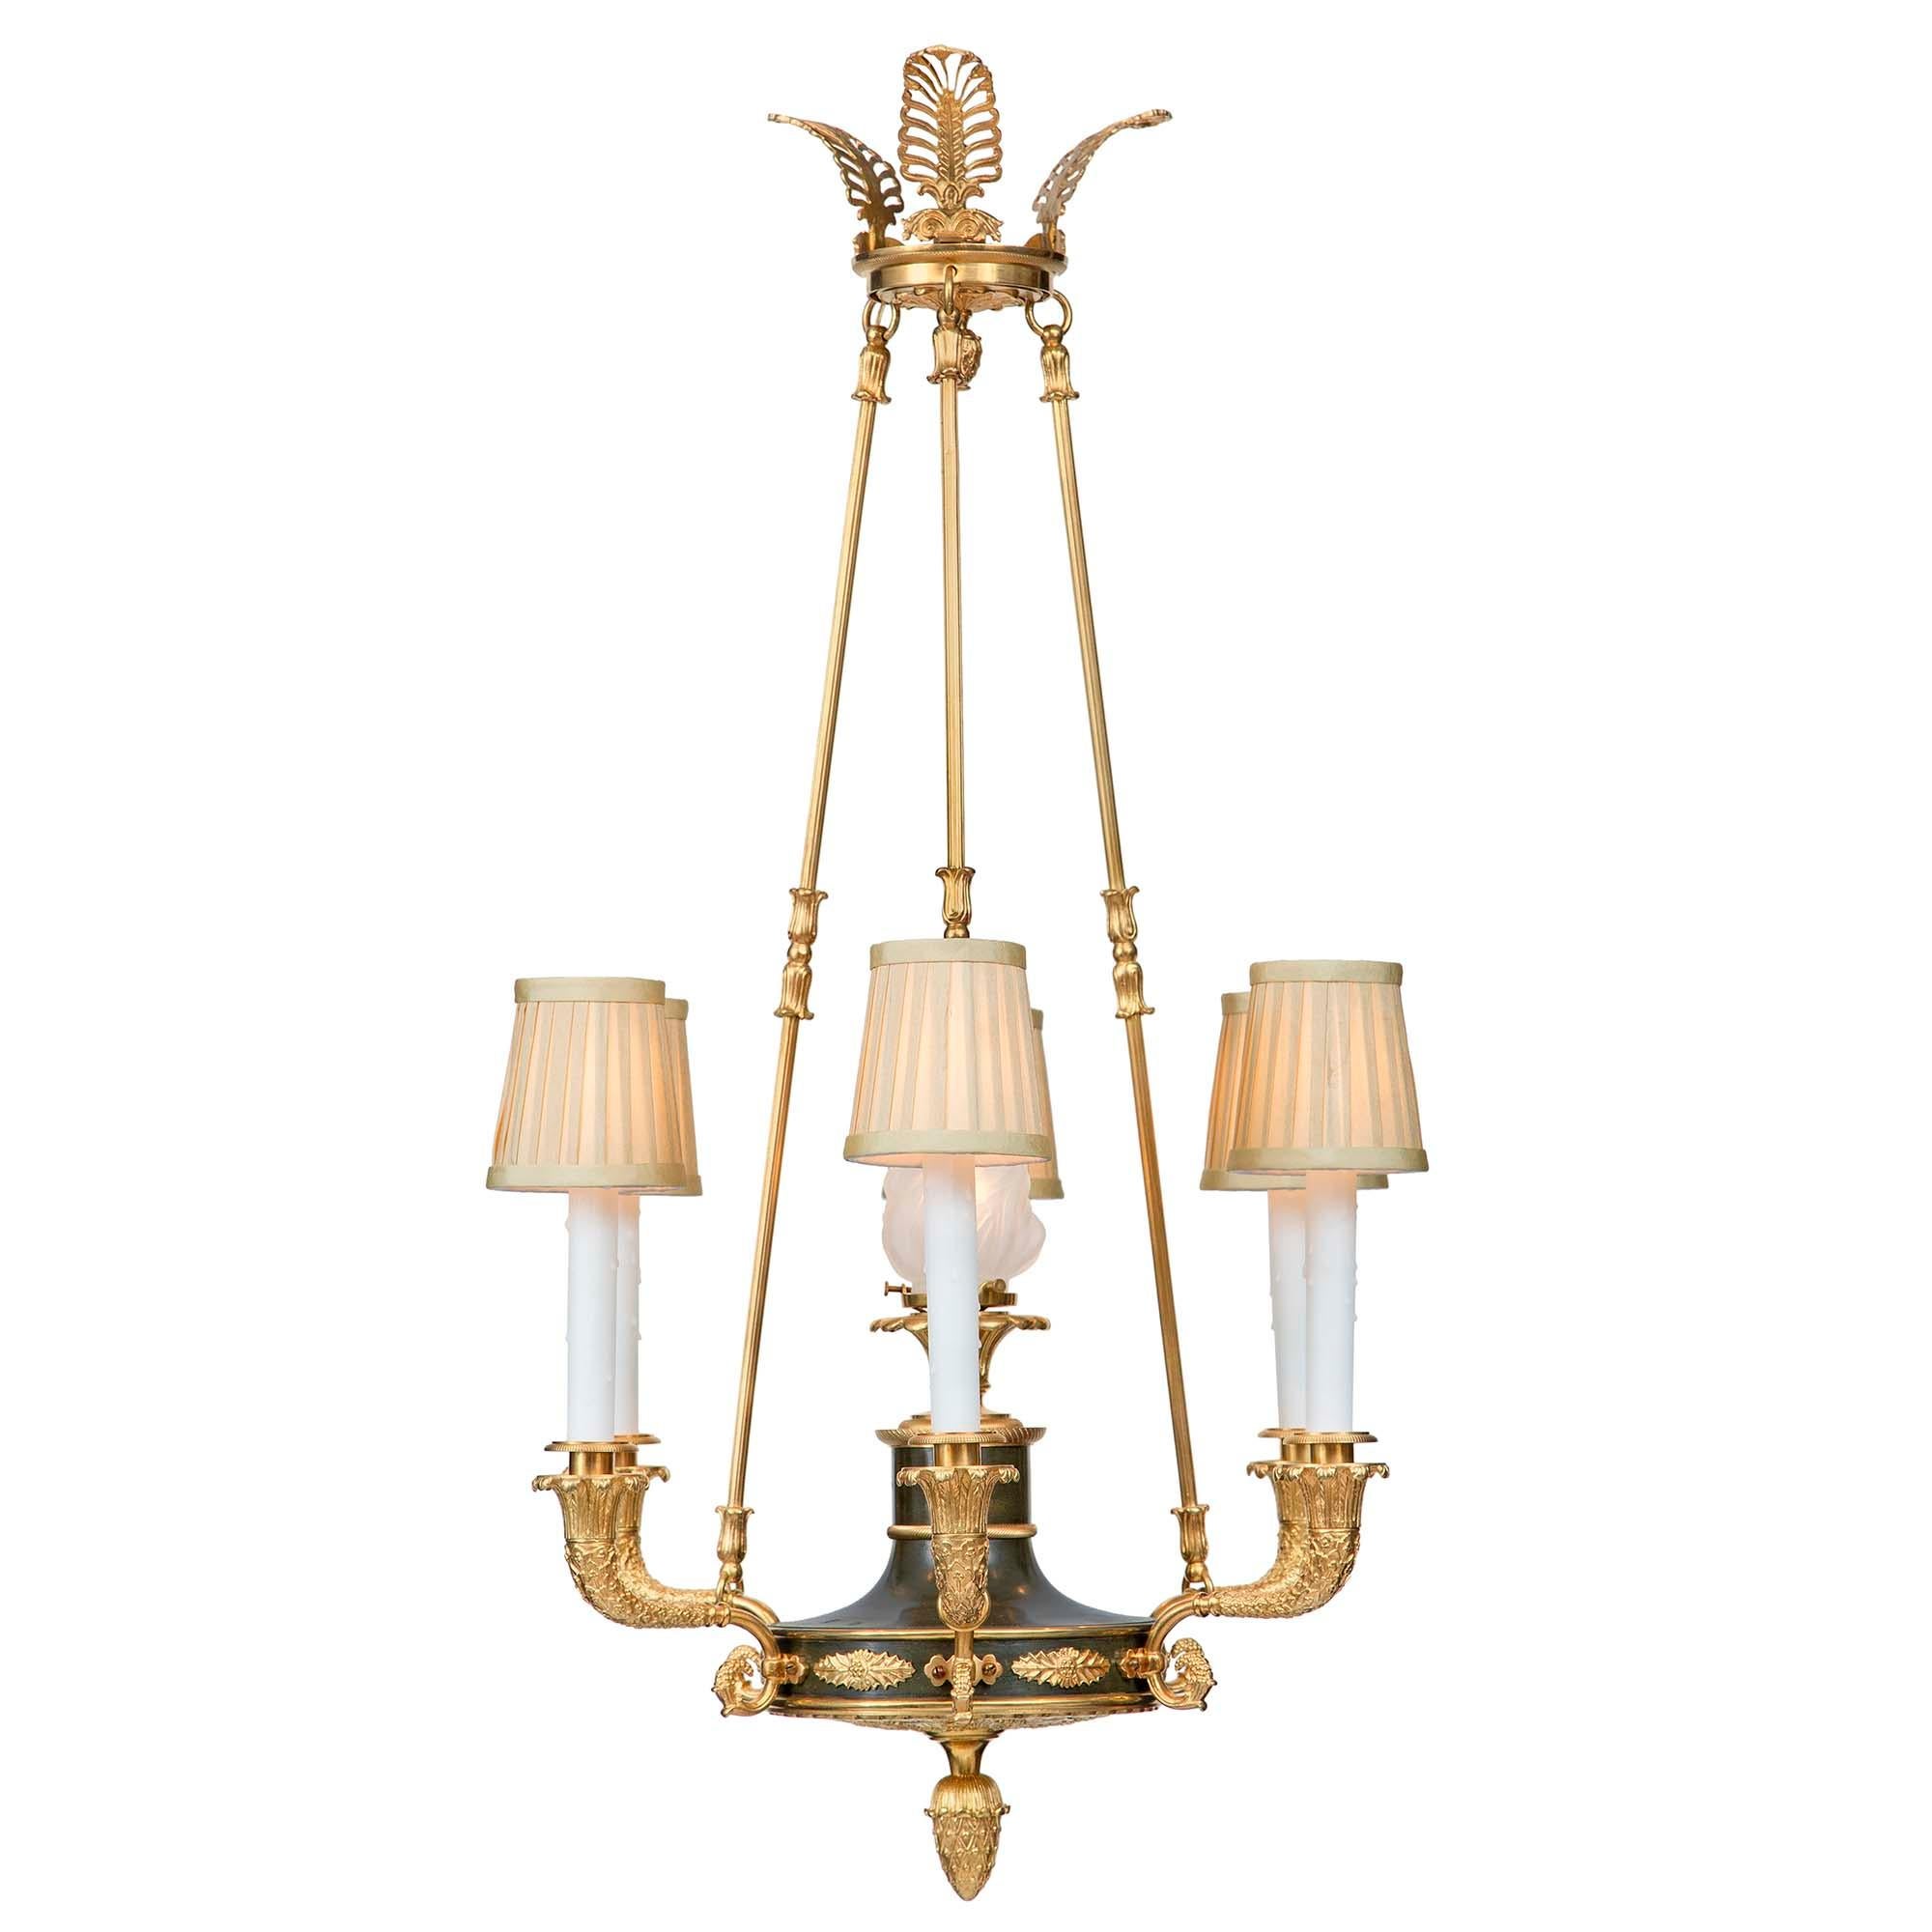 French 19th Century Empire Style Bronze and Ormolu Seven-Light Chandelier